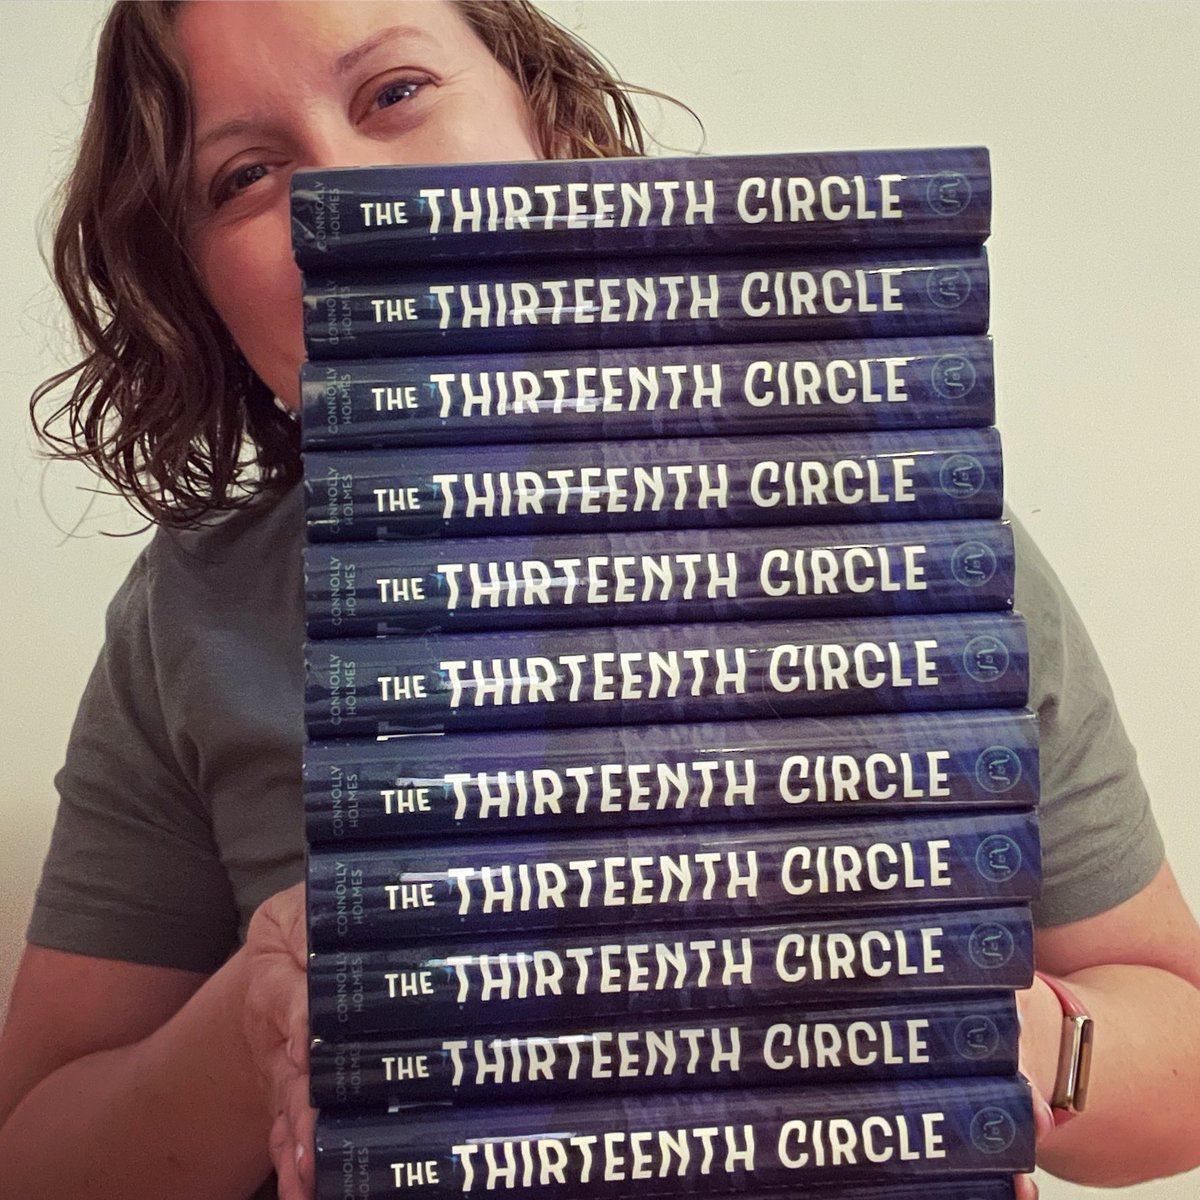 Giveaway alert! To celebrate THE THIRTEENTH CIRCLE being out for two months, I’m giving some hardcovers away to school libraries! If you’re an elementary or middle school librarian whose students enjoy sci-fi/mystery, please reach out! #elementaryschool #schoollibrarian #giveaway